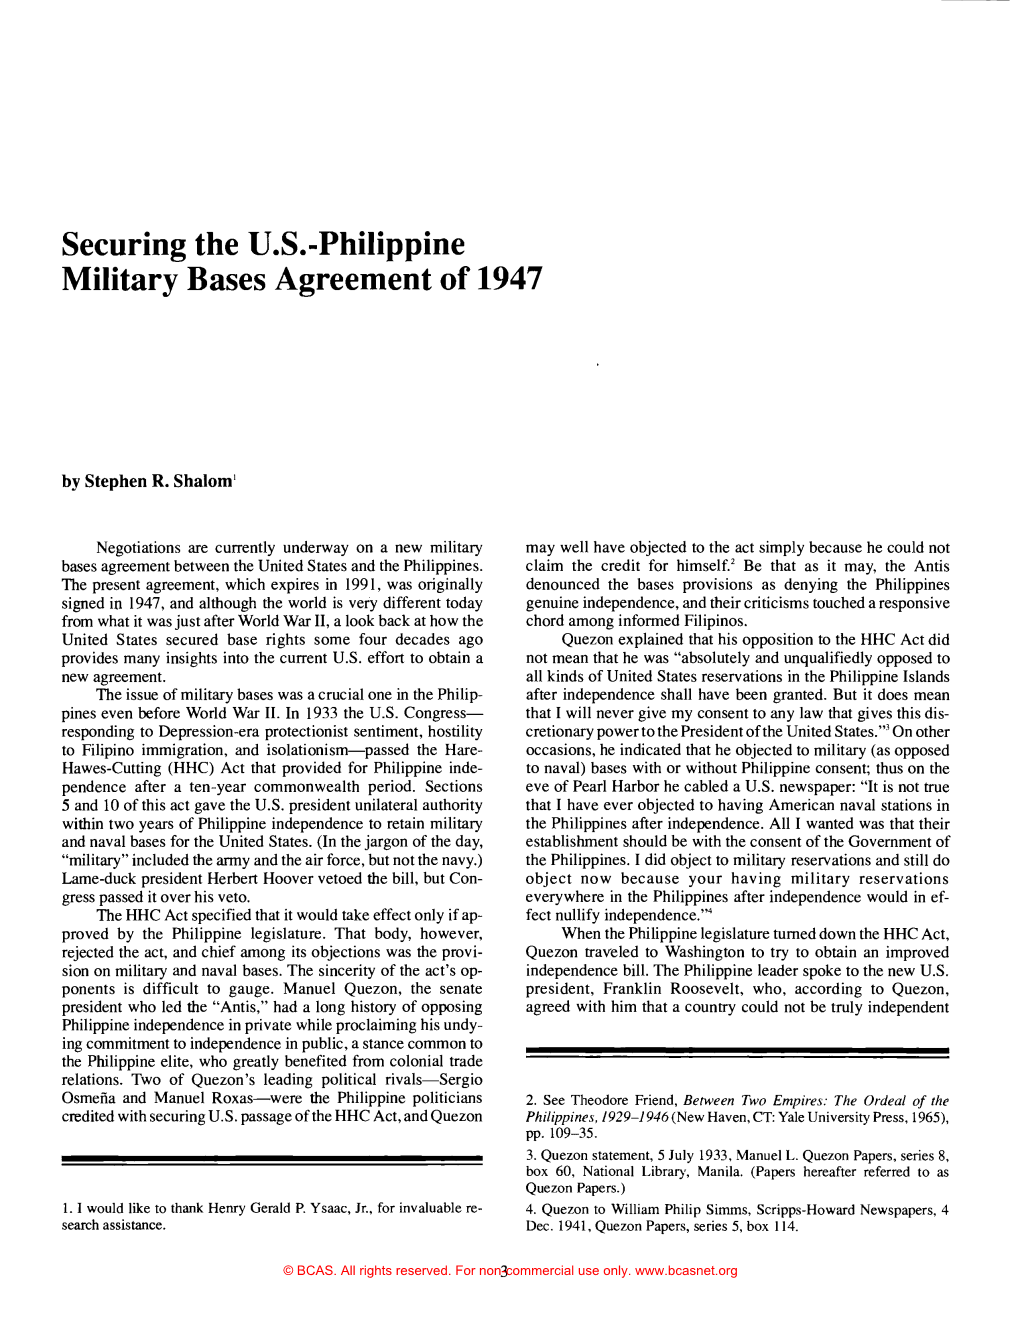 Securing the U.S.-Philippine Military Bases Agreement of 1947